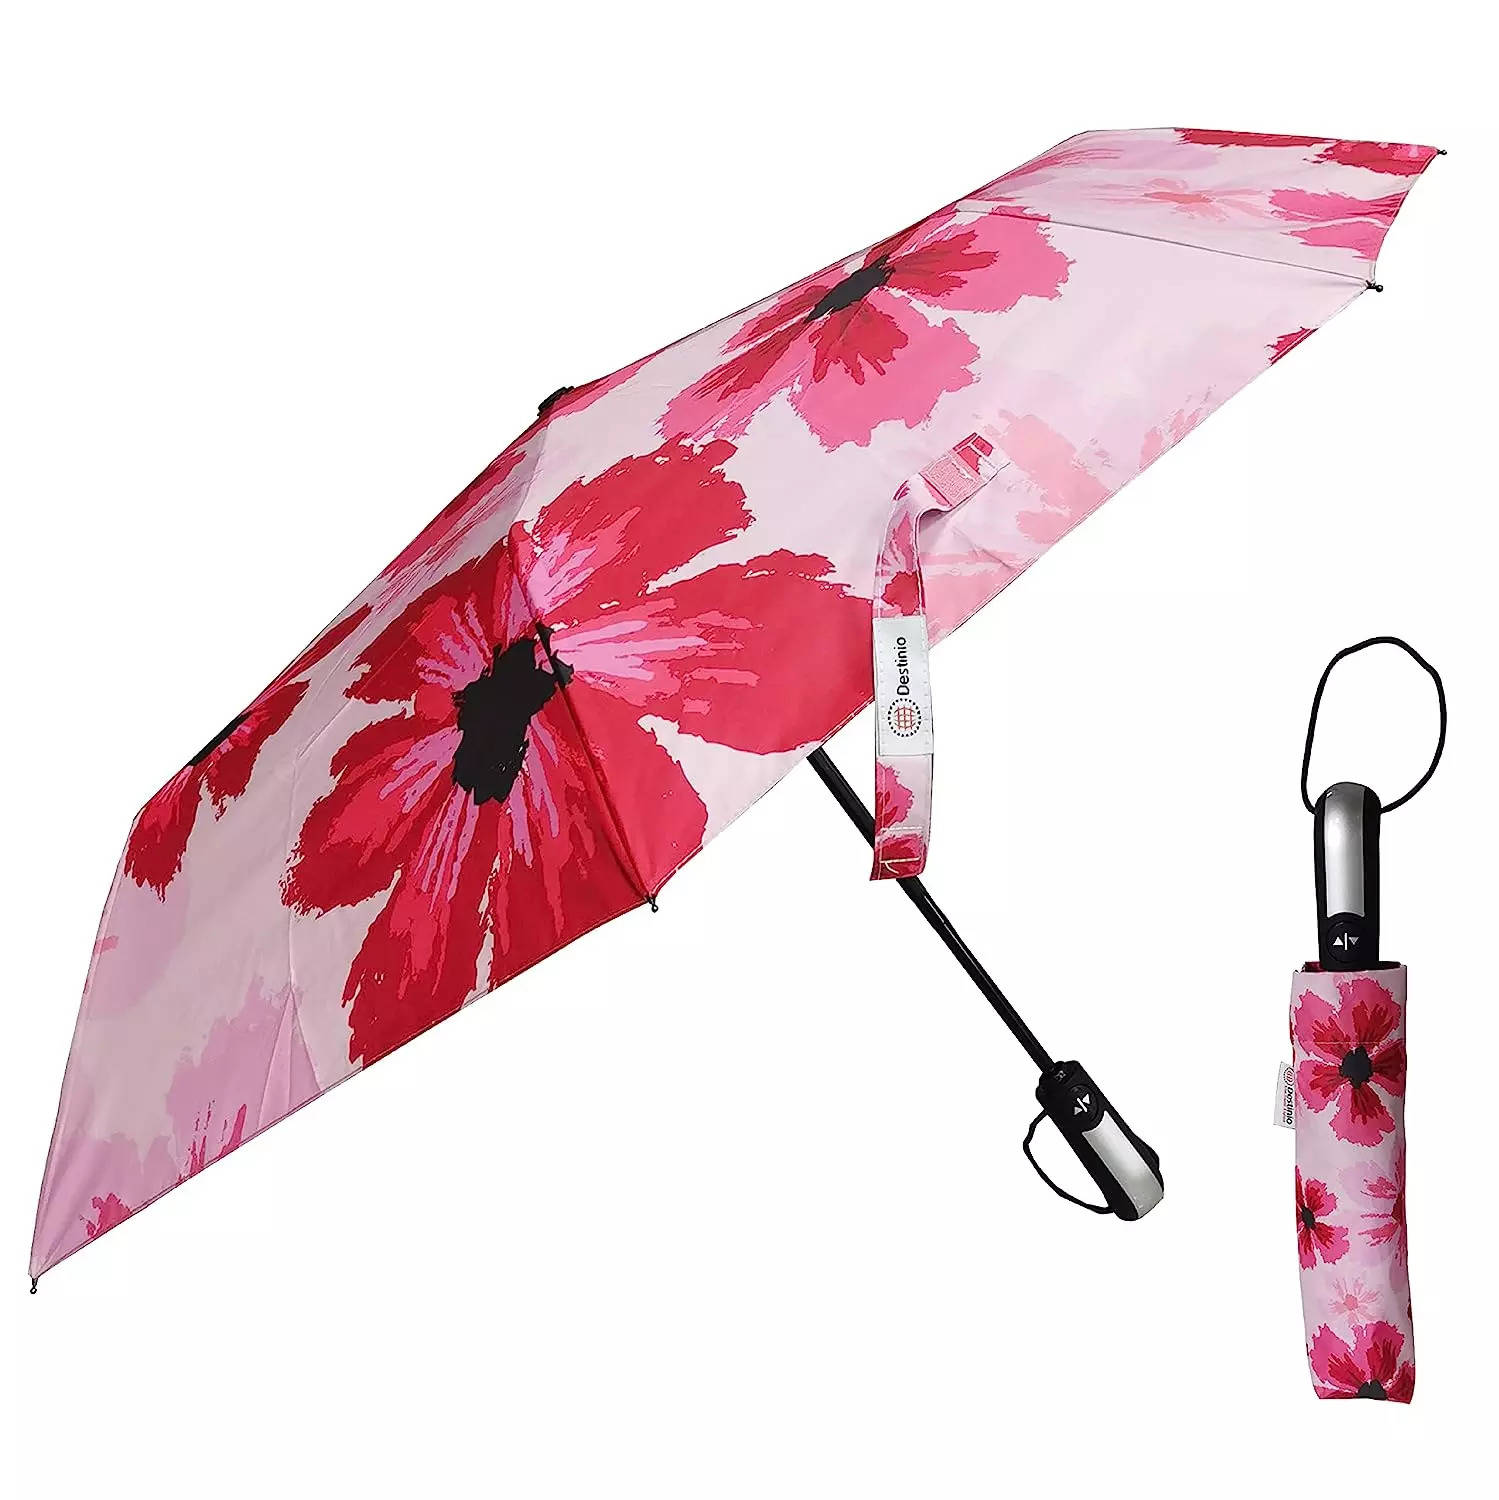 Six Travel Umbrellas That Will Fit in Your Bag - Outside Online